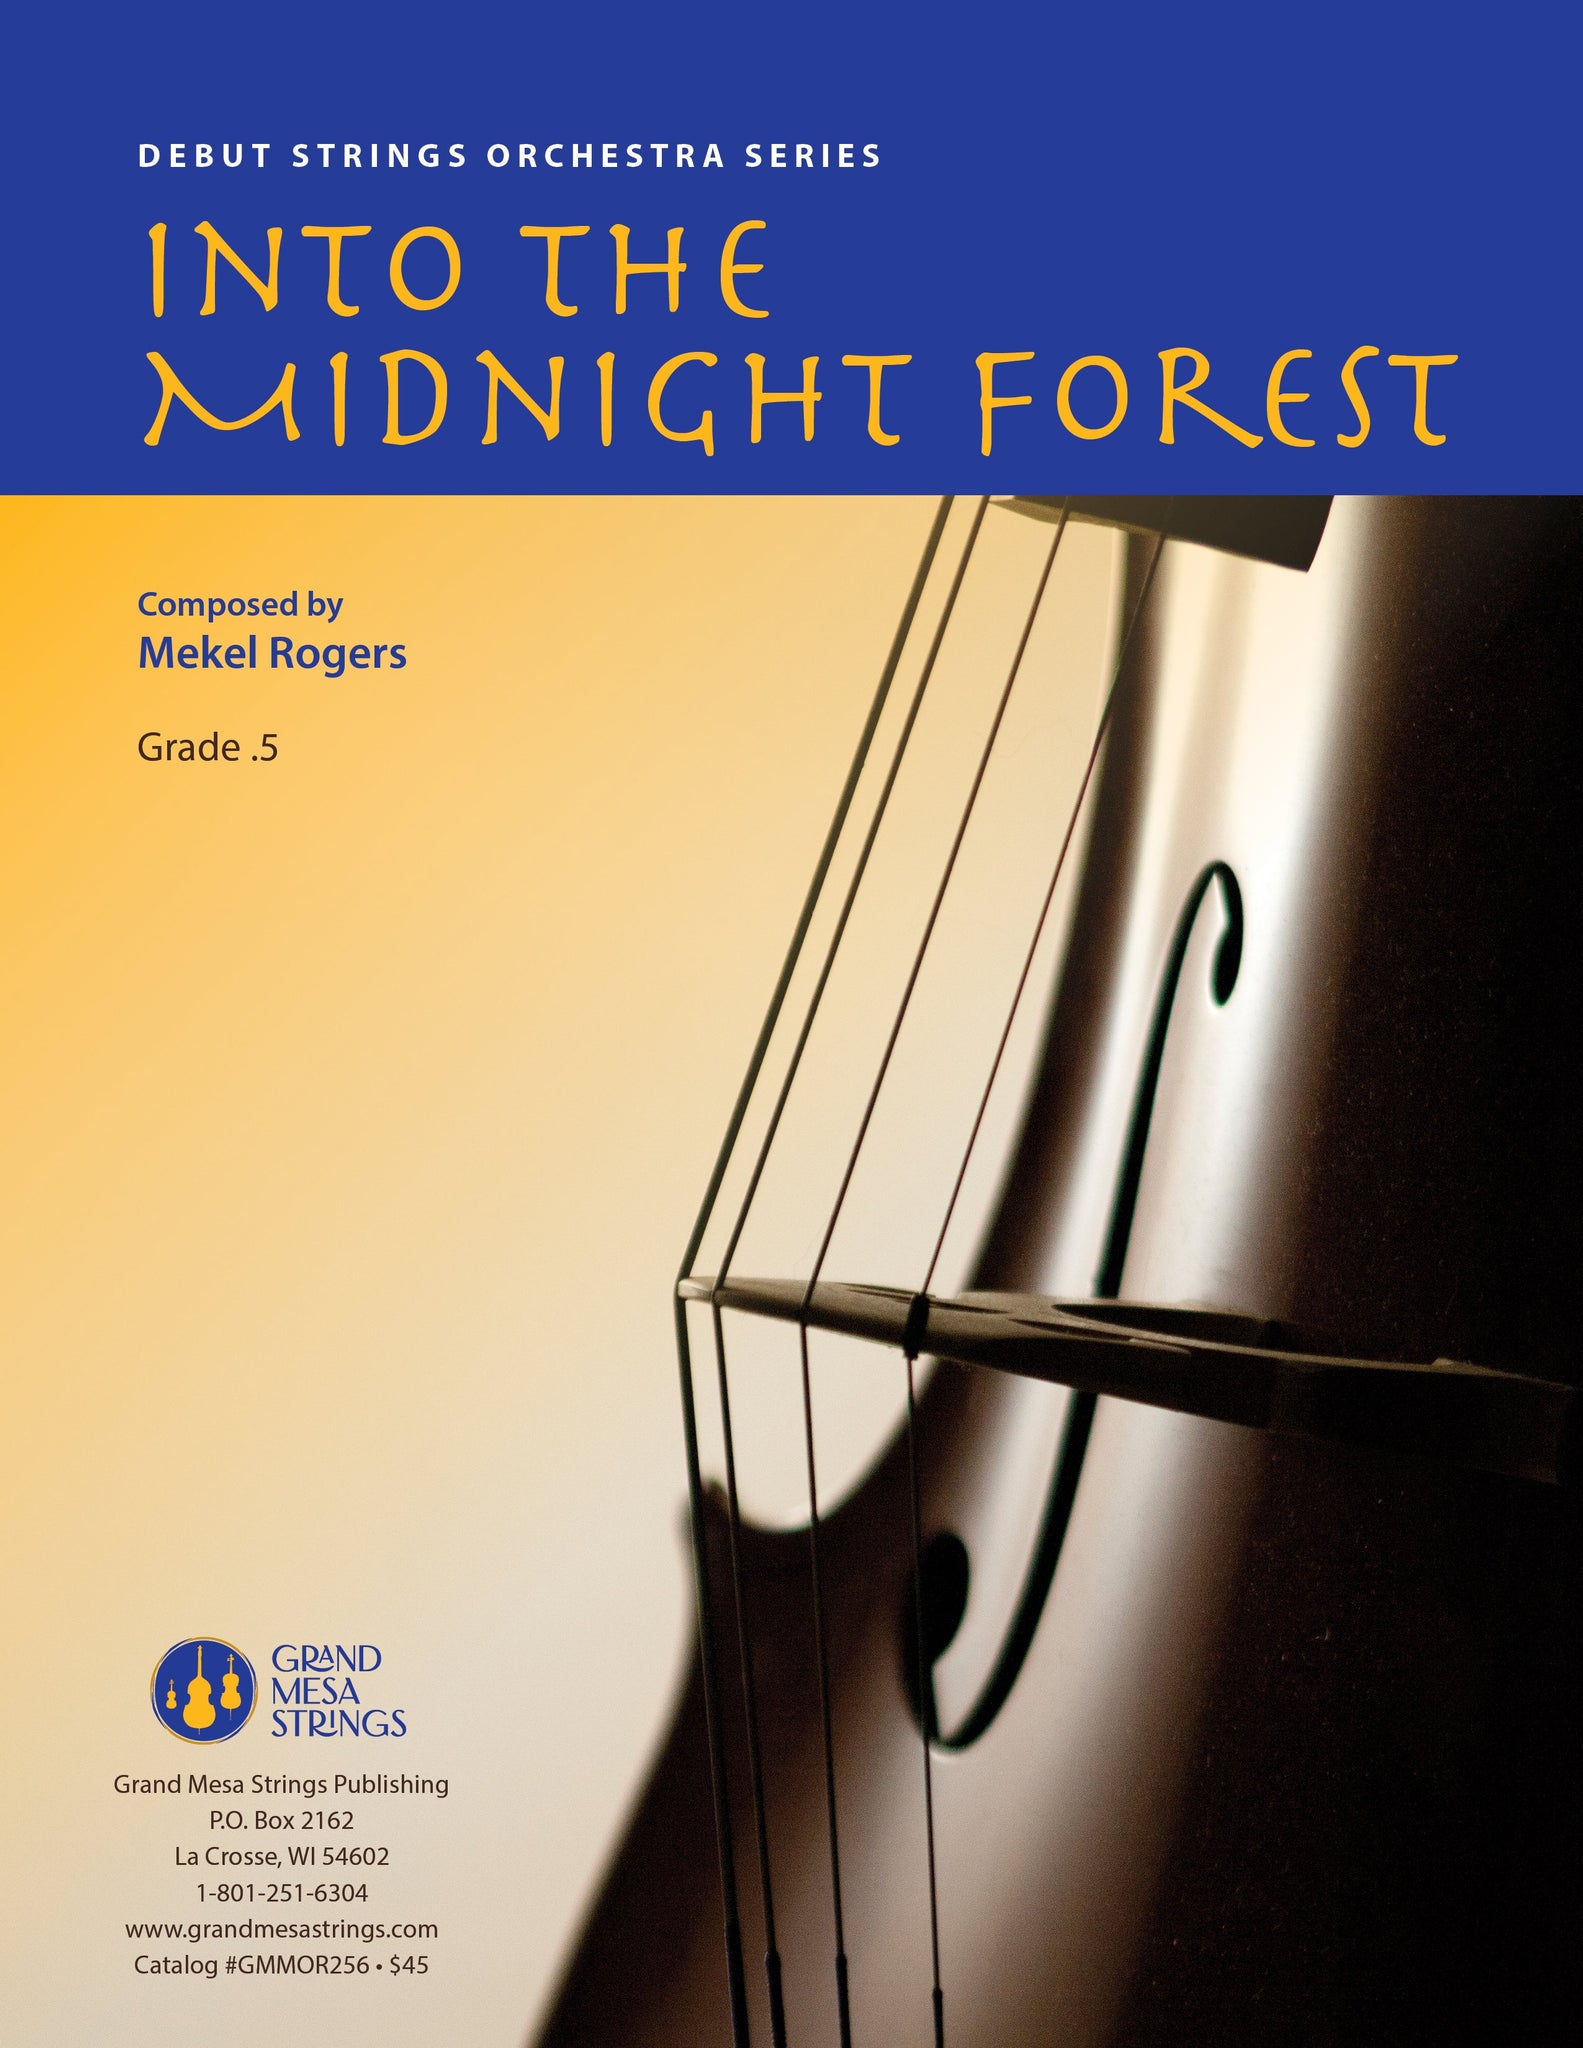 Strings sheet music cover of Into the Midnight Forest, composed by Mekel Rogers.